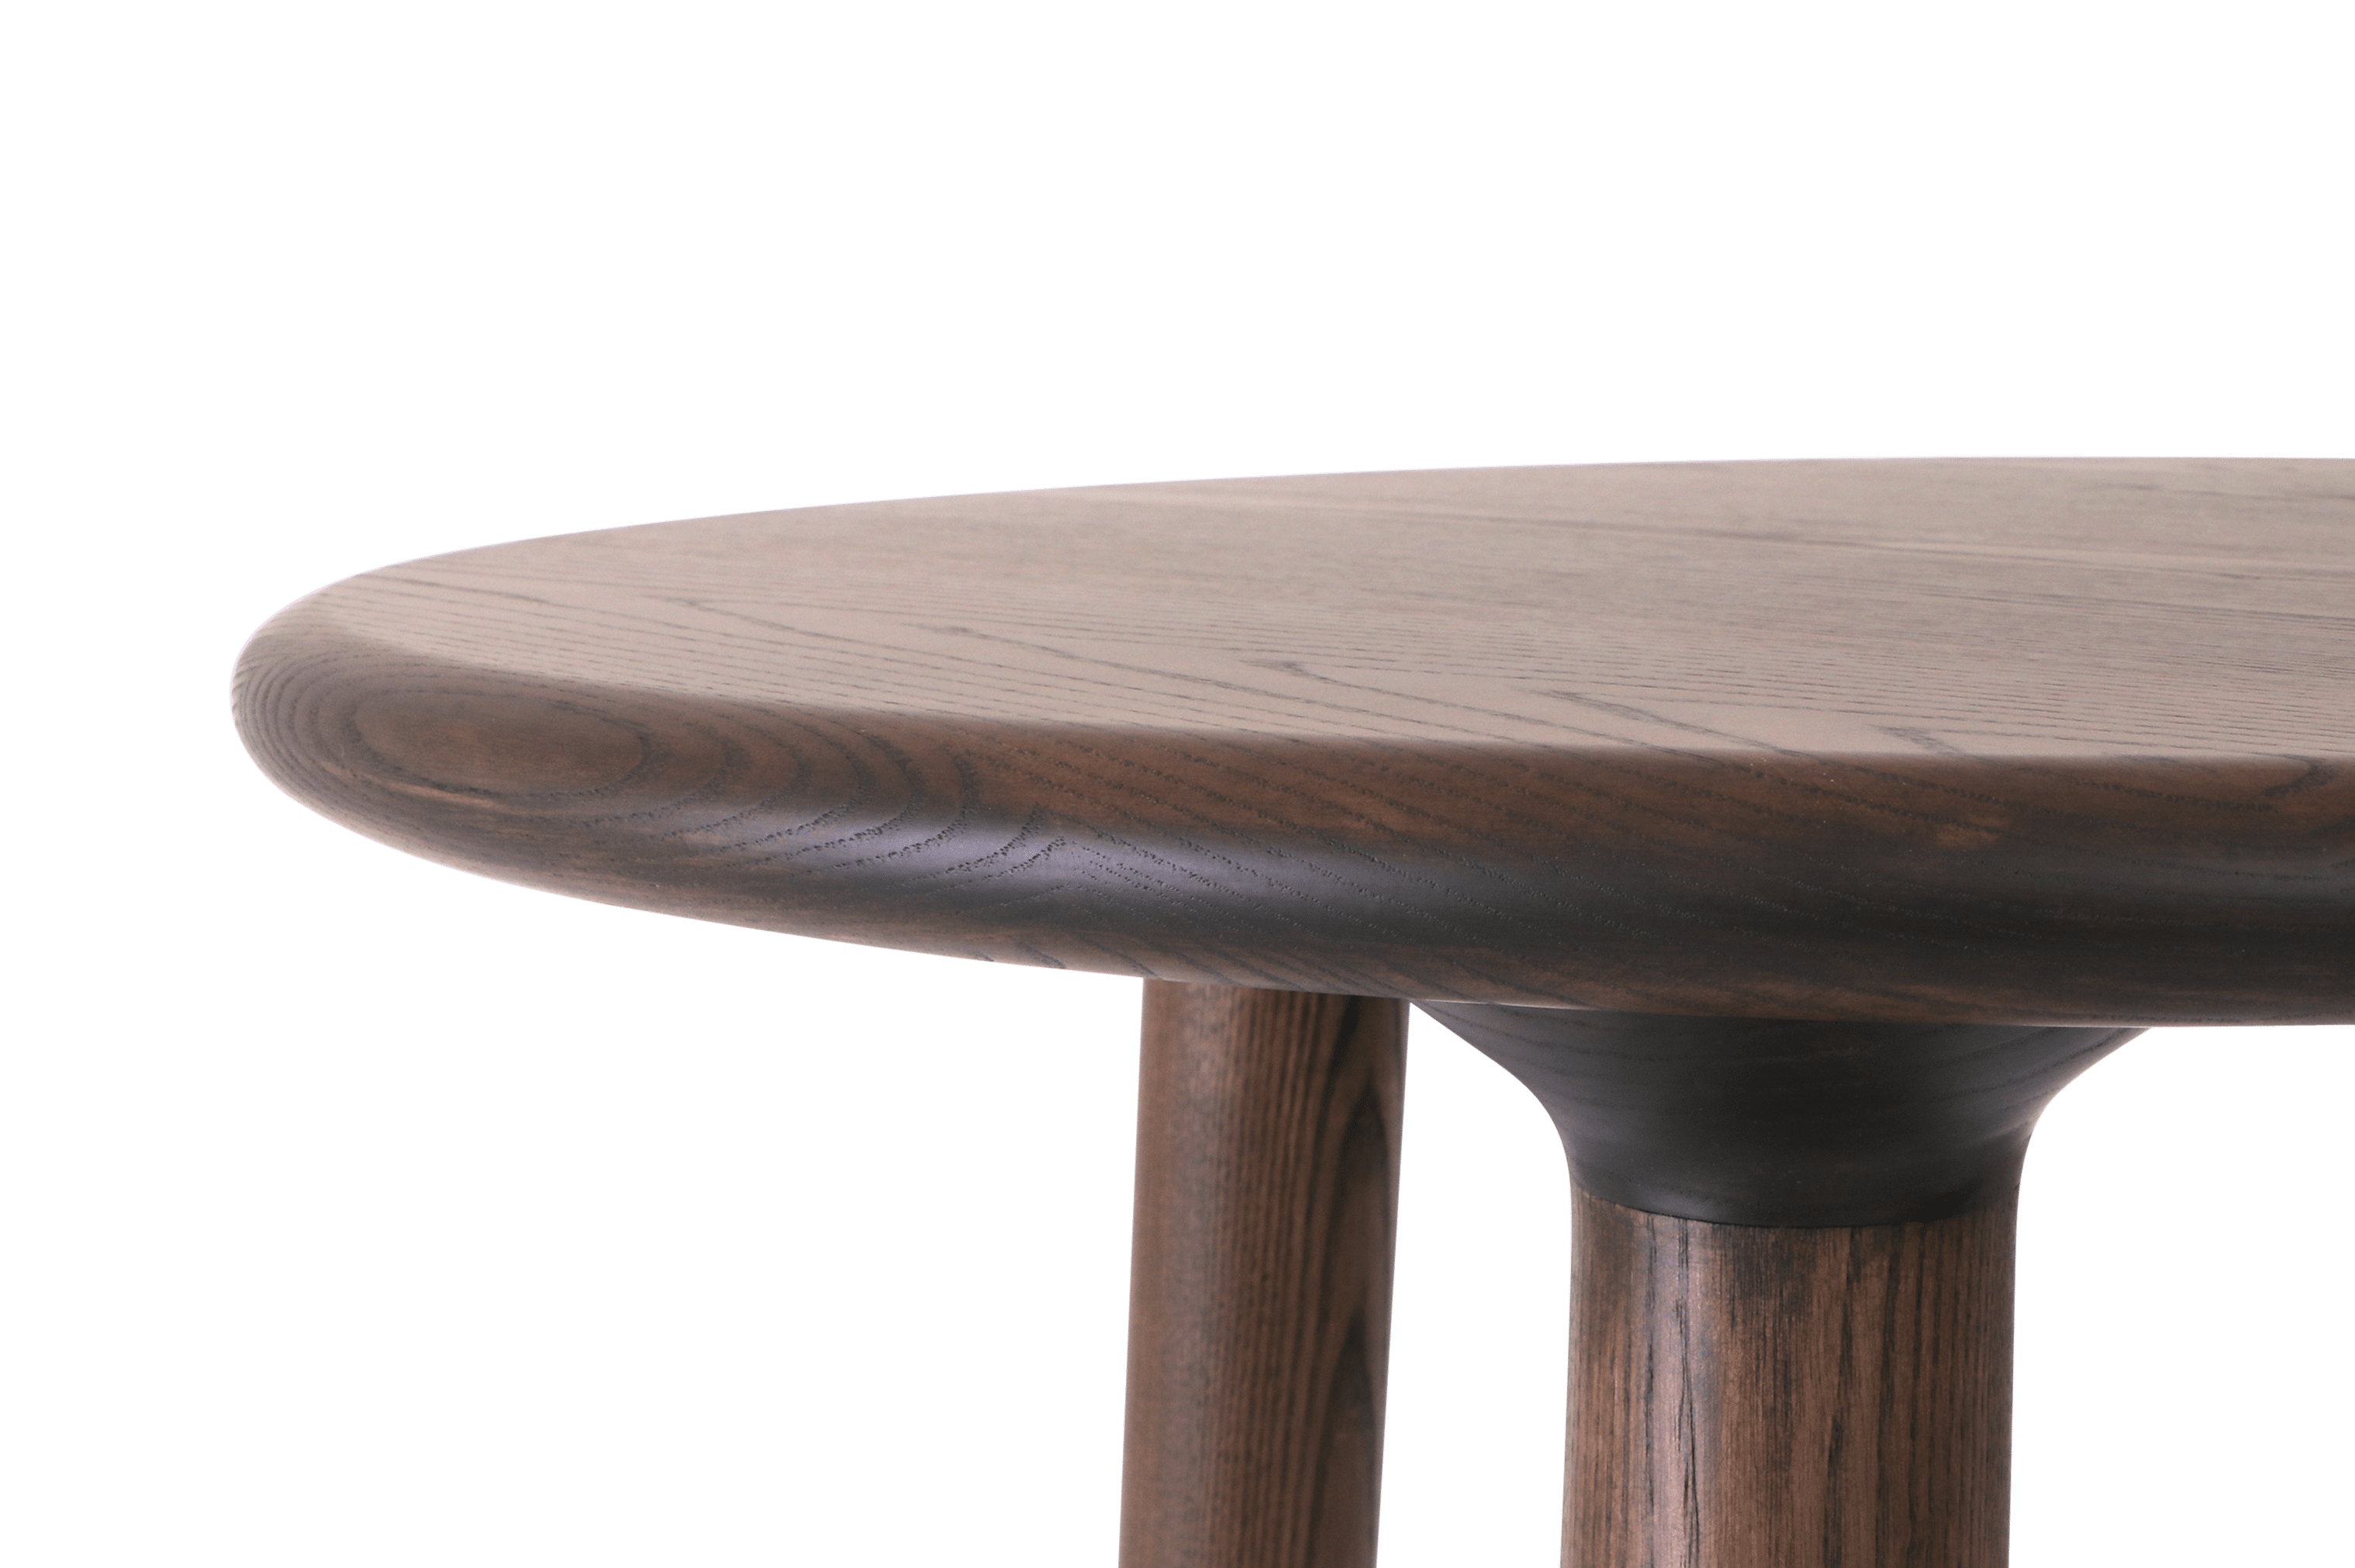 The Dowel Round Leaner part of the wider Dowel Collection of solid timber tables and leaners